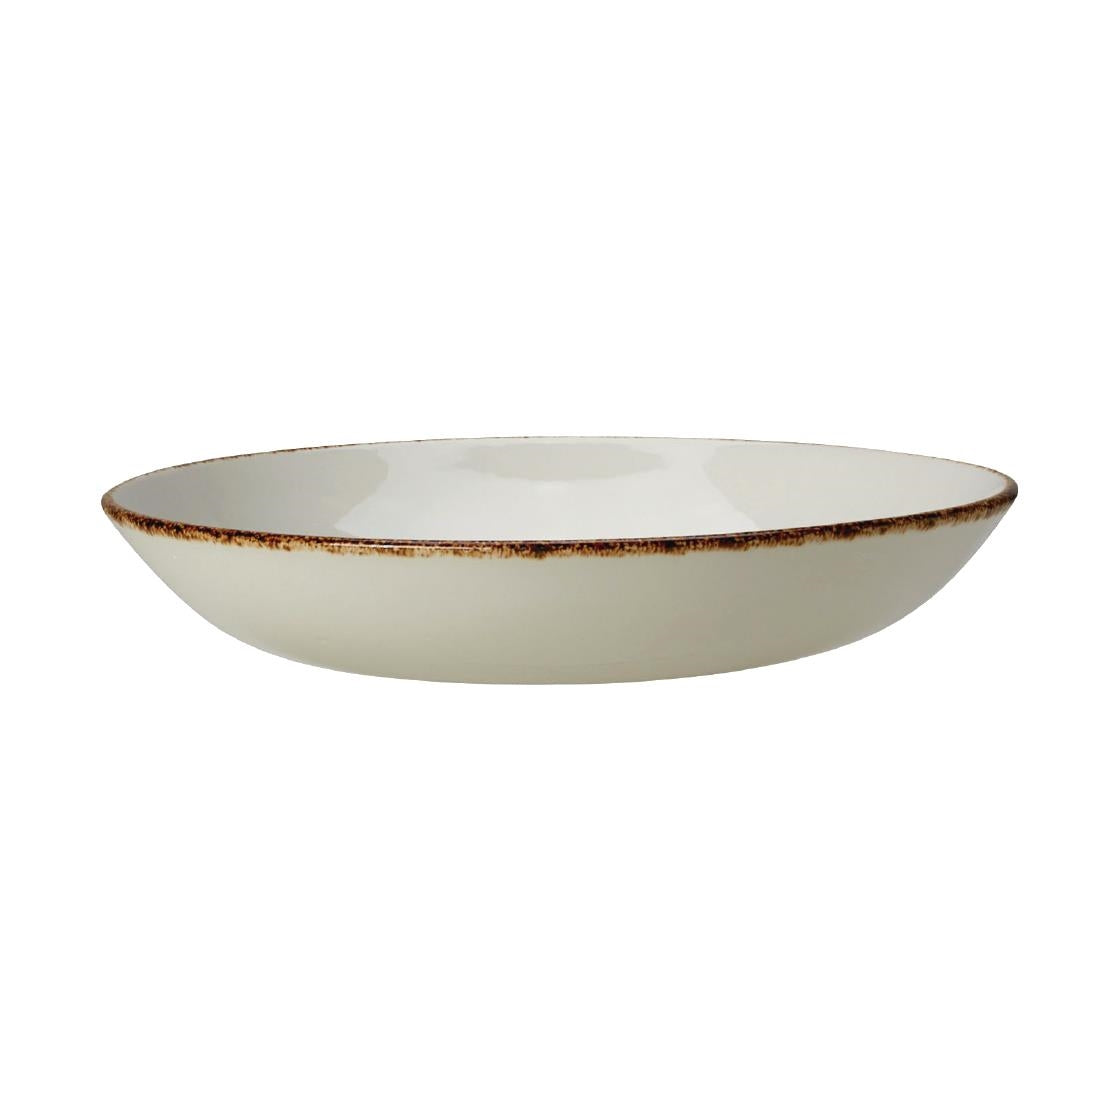 VV758 Steelite Brown Dapple Coupe Bowls 253mm (Pack of 12)